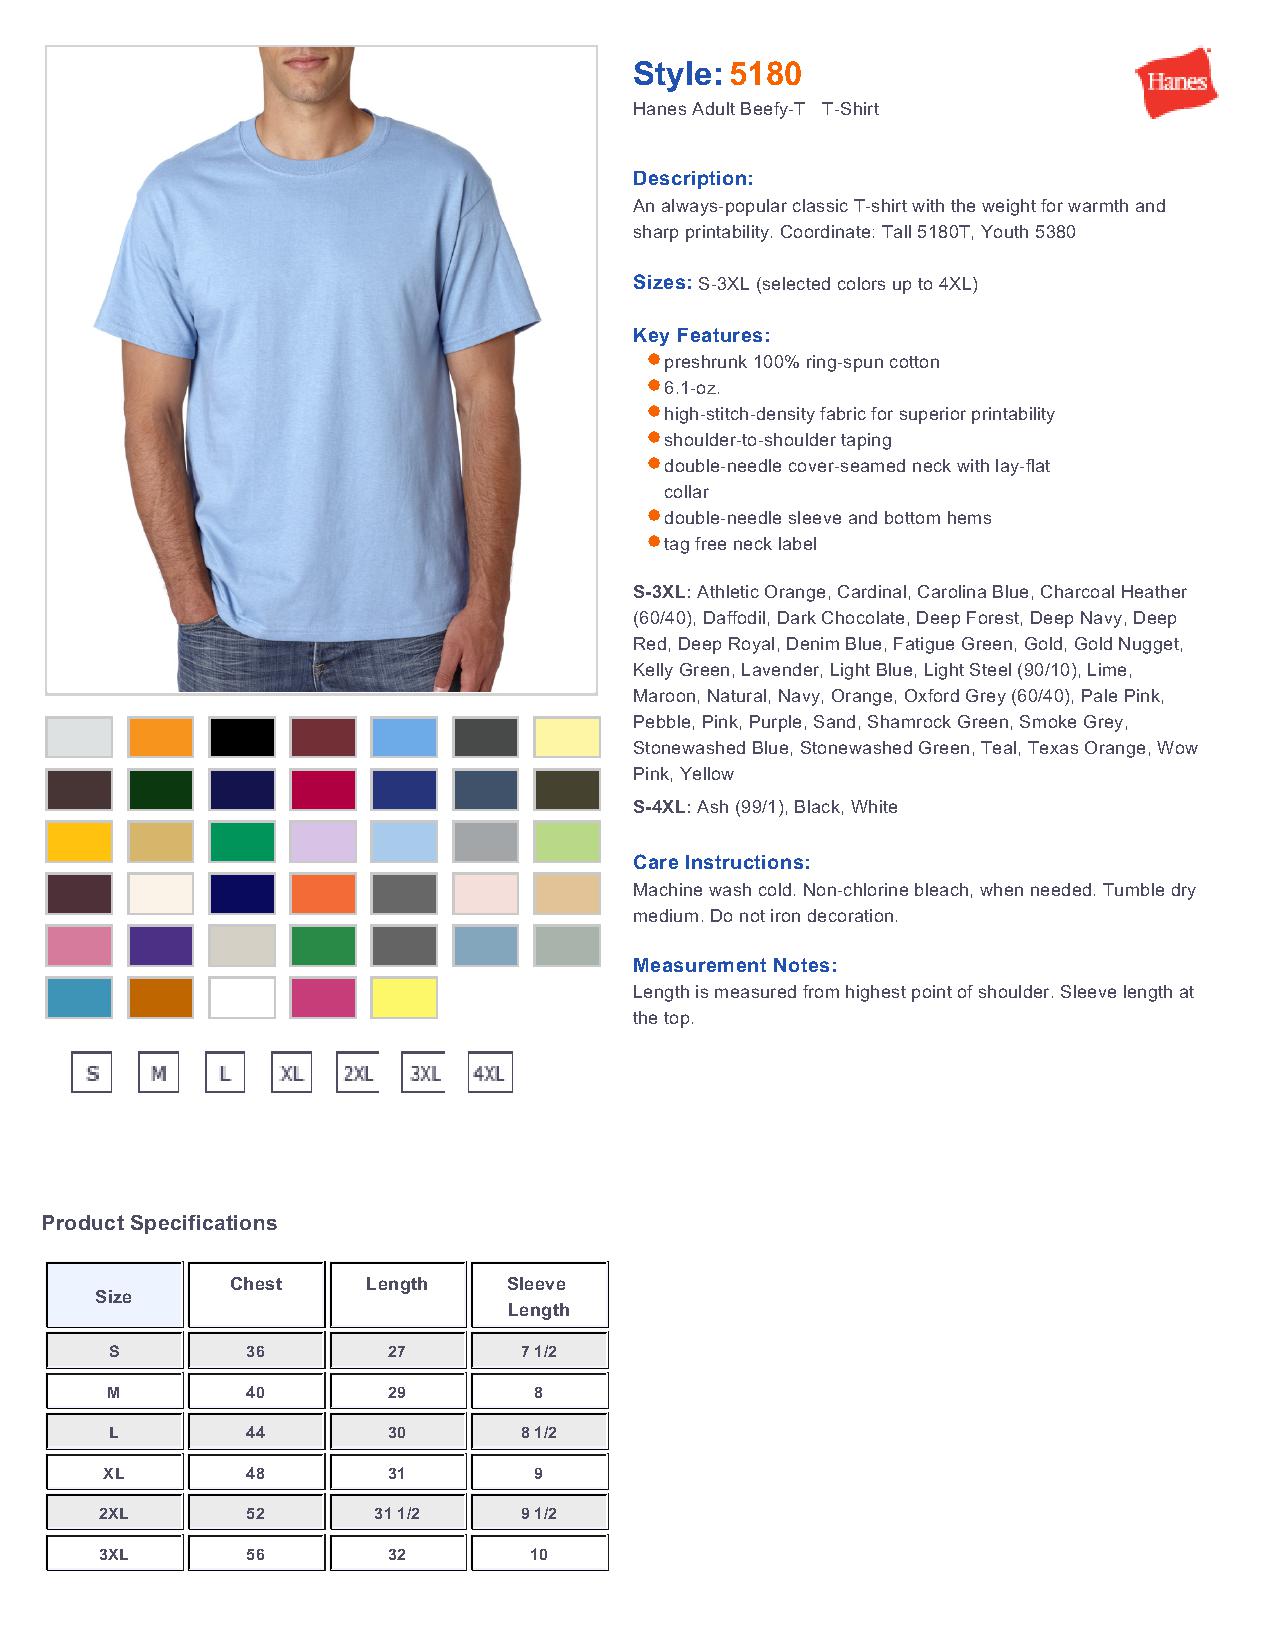 Hanes® 5180 Beefy-T® - Born To Be Worn 100% Cotton T-Shirt $6.02 - Men ...